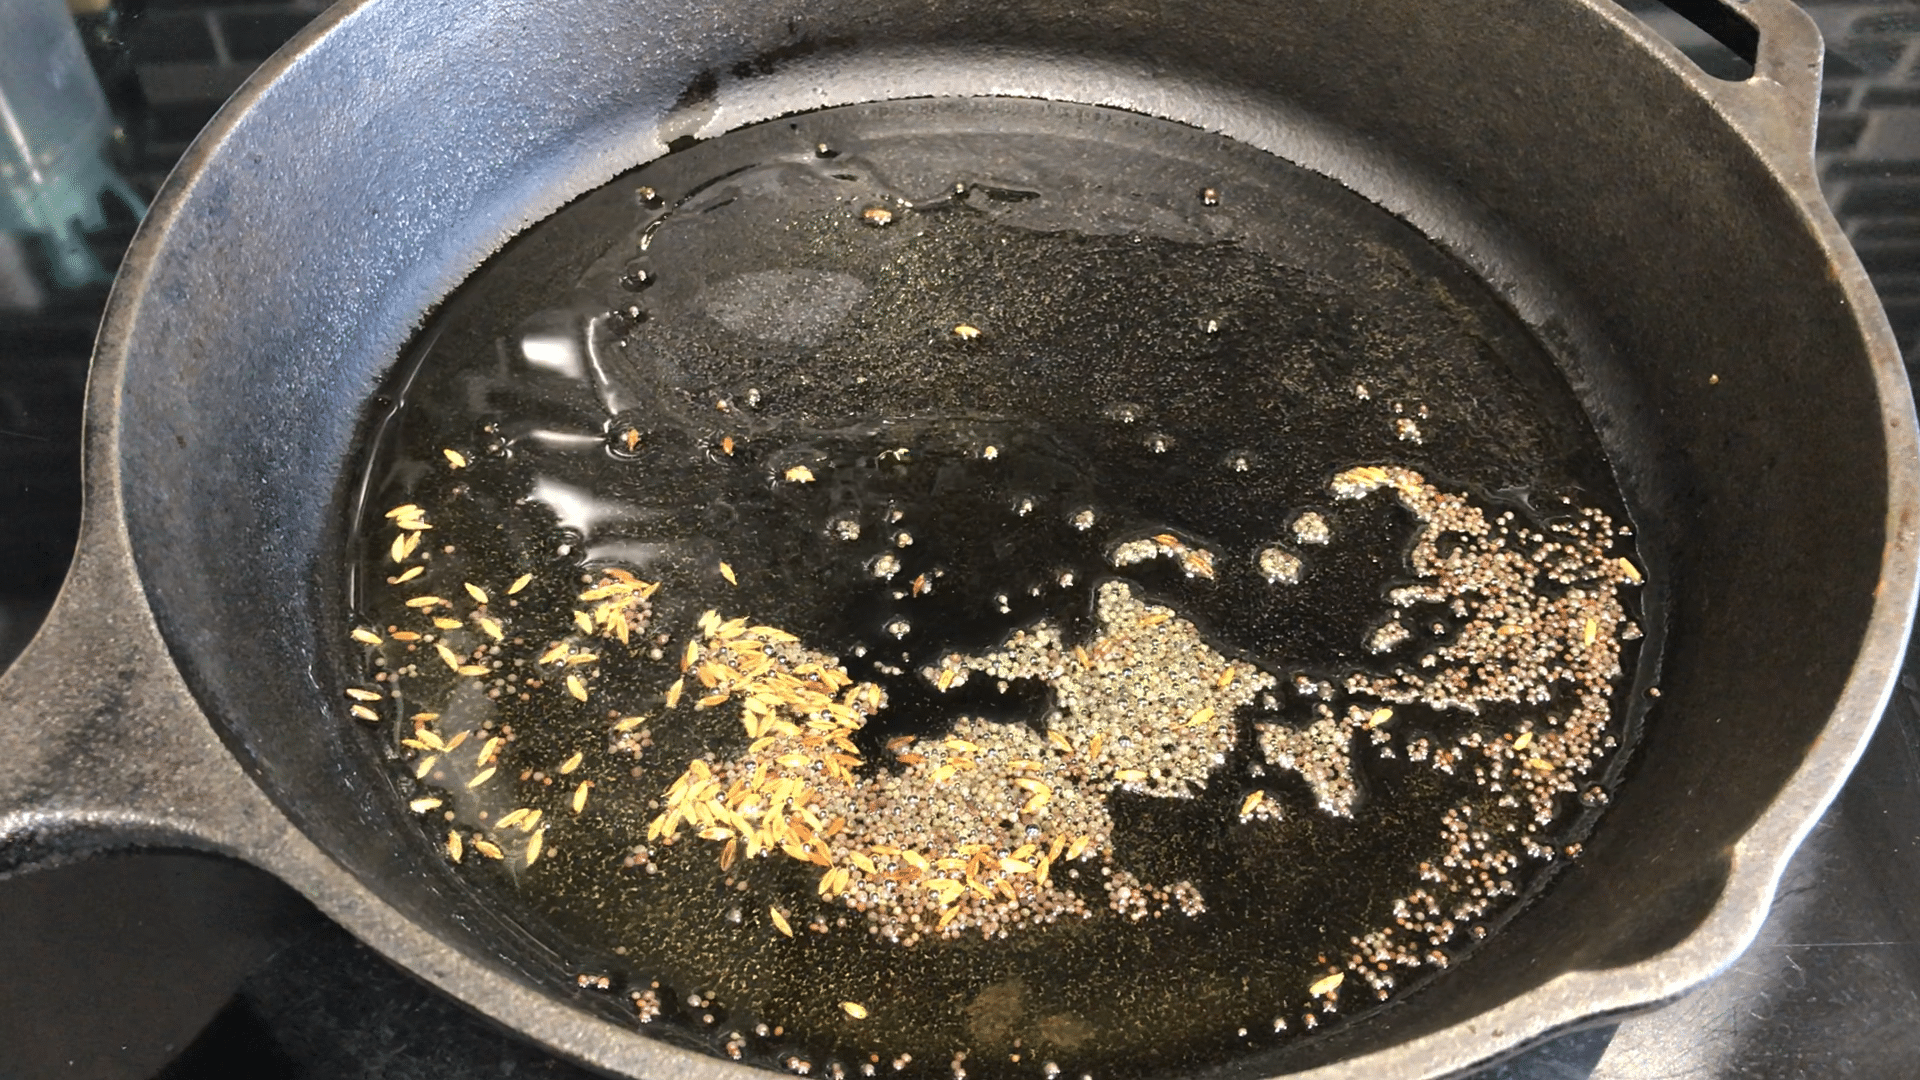 A close up of a cast iron pan on a stove, with oil and spices